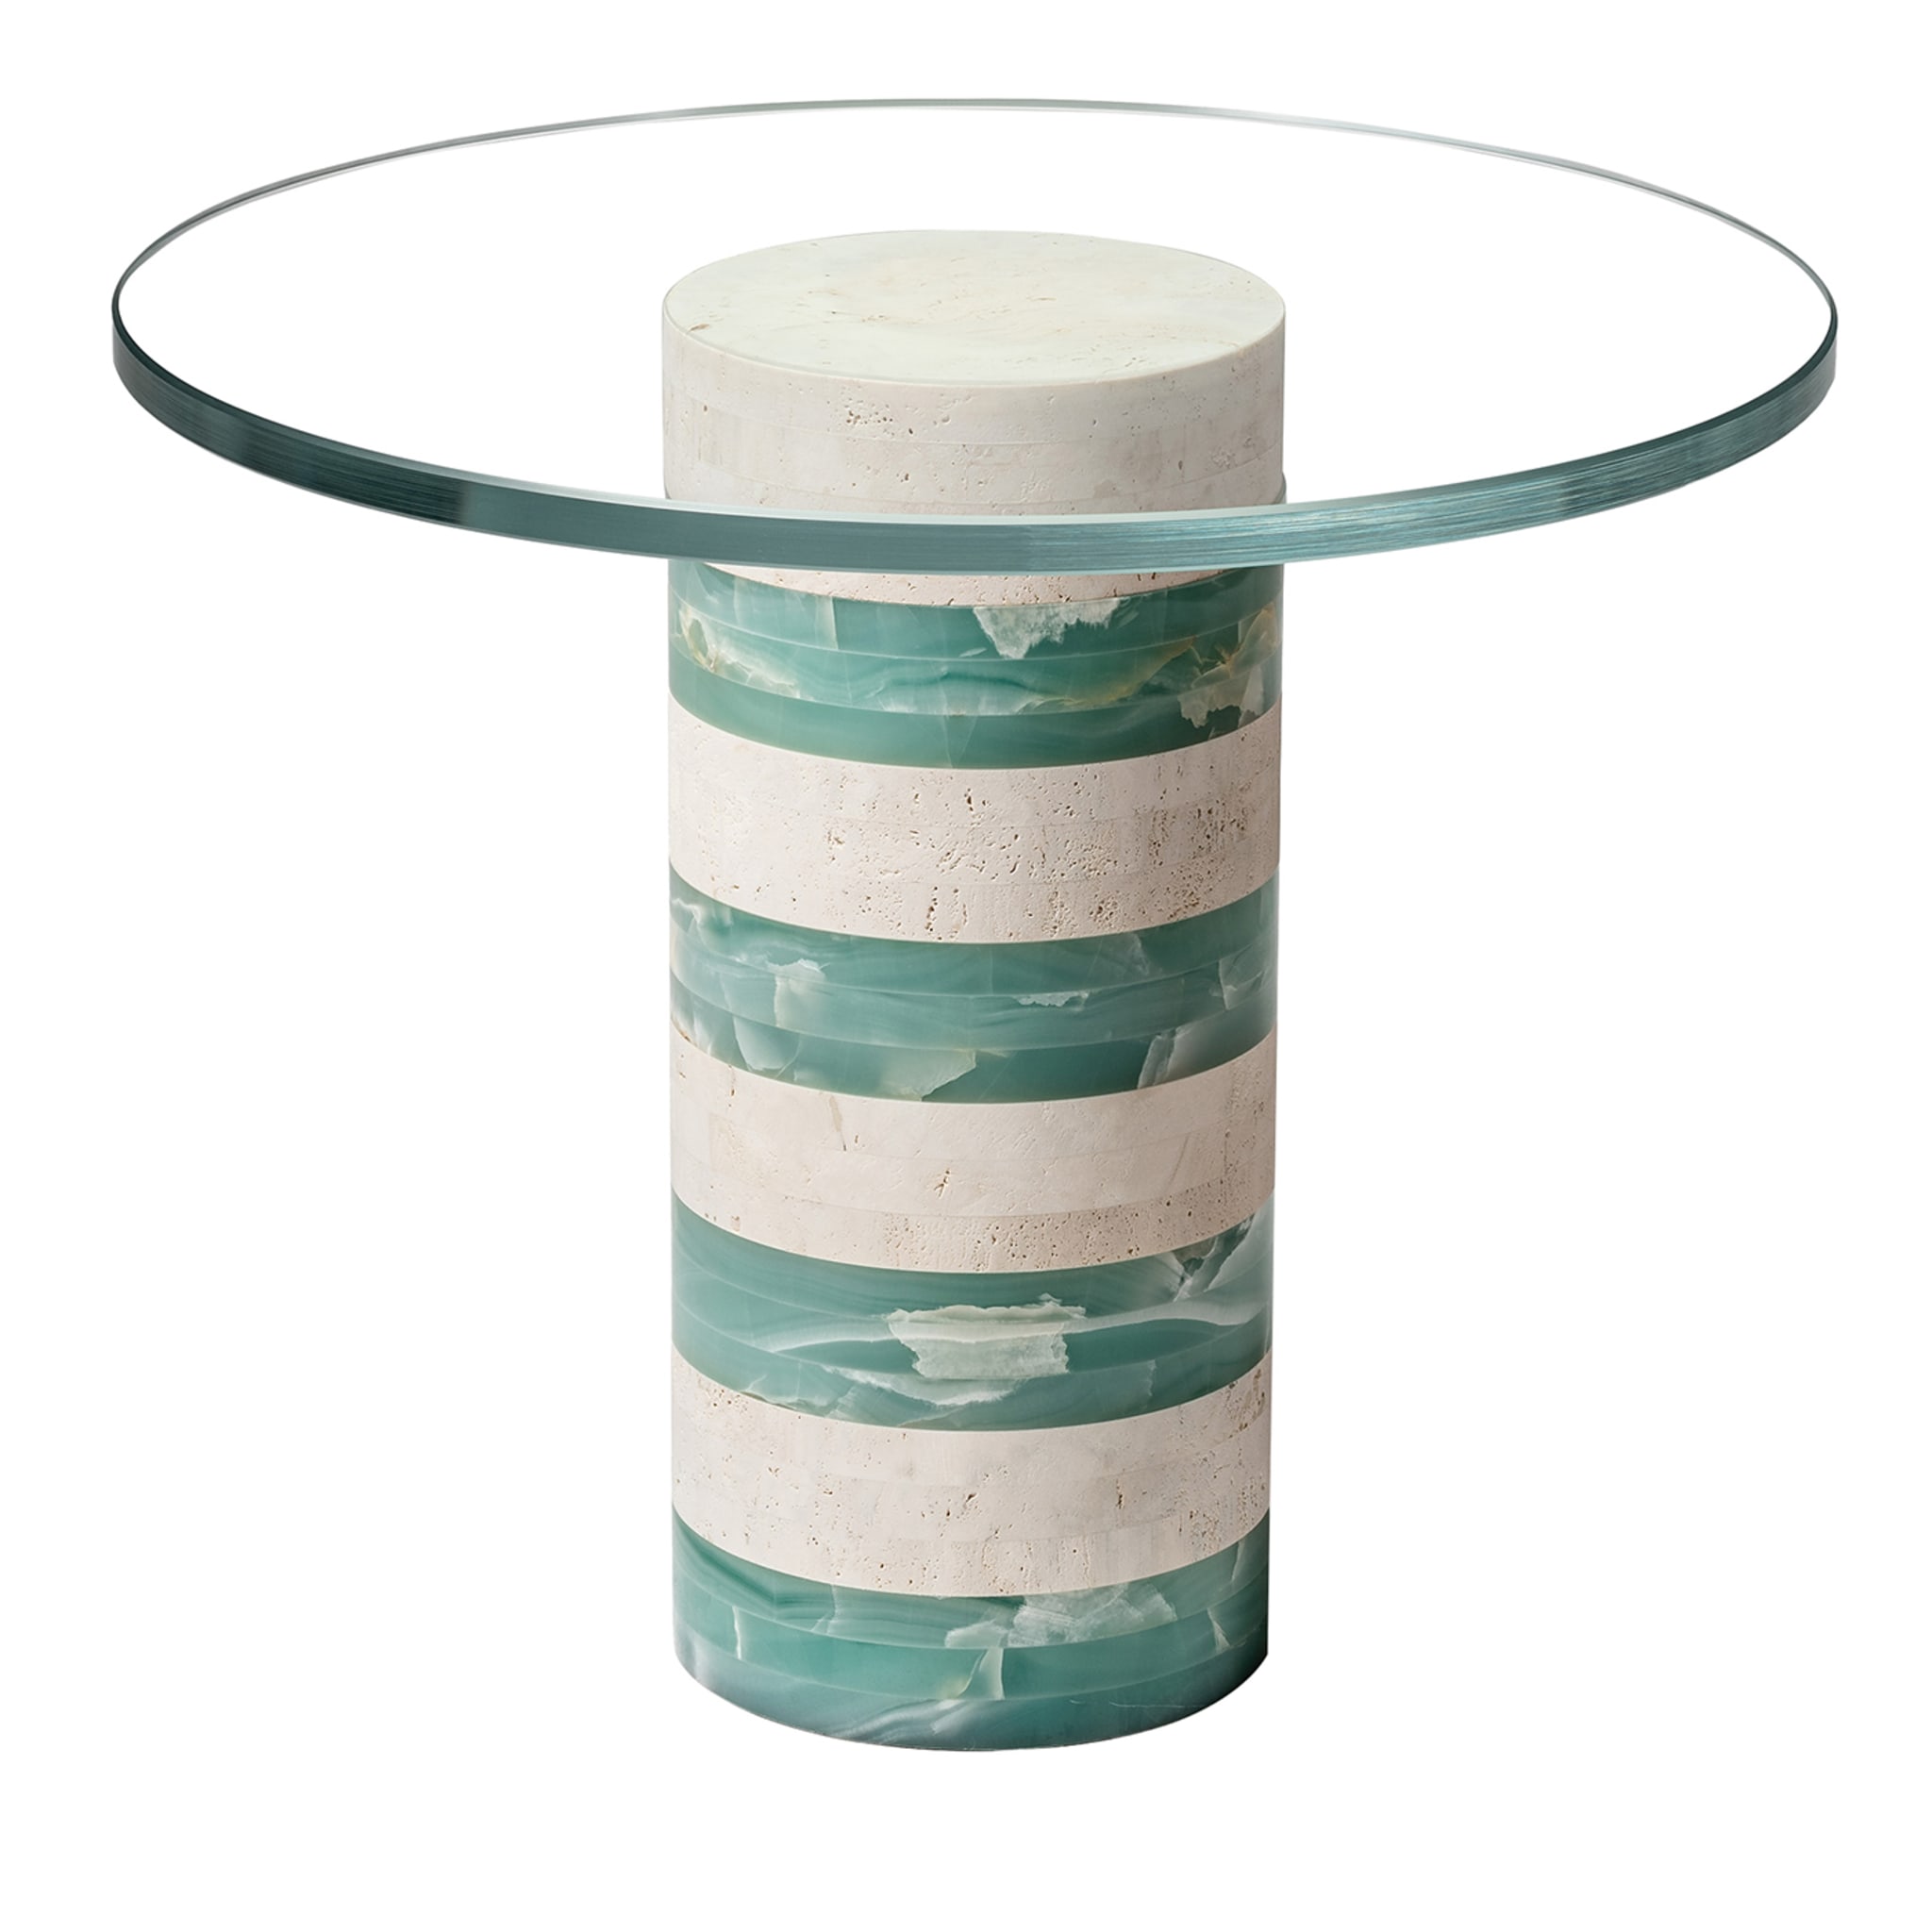 Architexture Turquoise Side Table by Patricia Urquiola - Main view